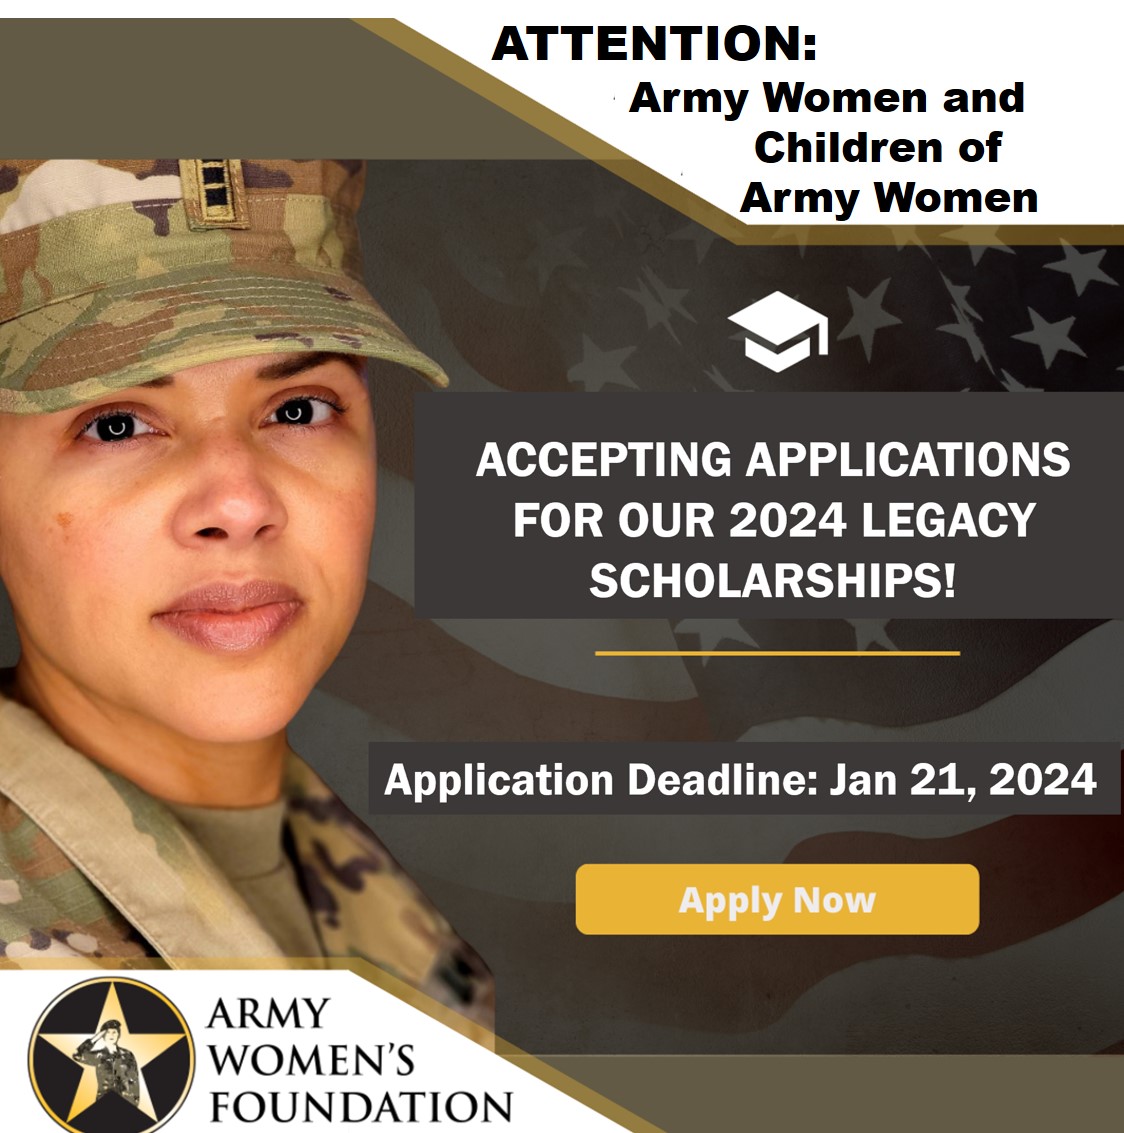 Now Accepting Applications for the 2024 Legacy Scholarships